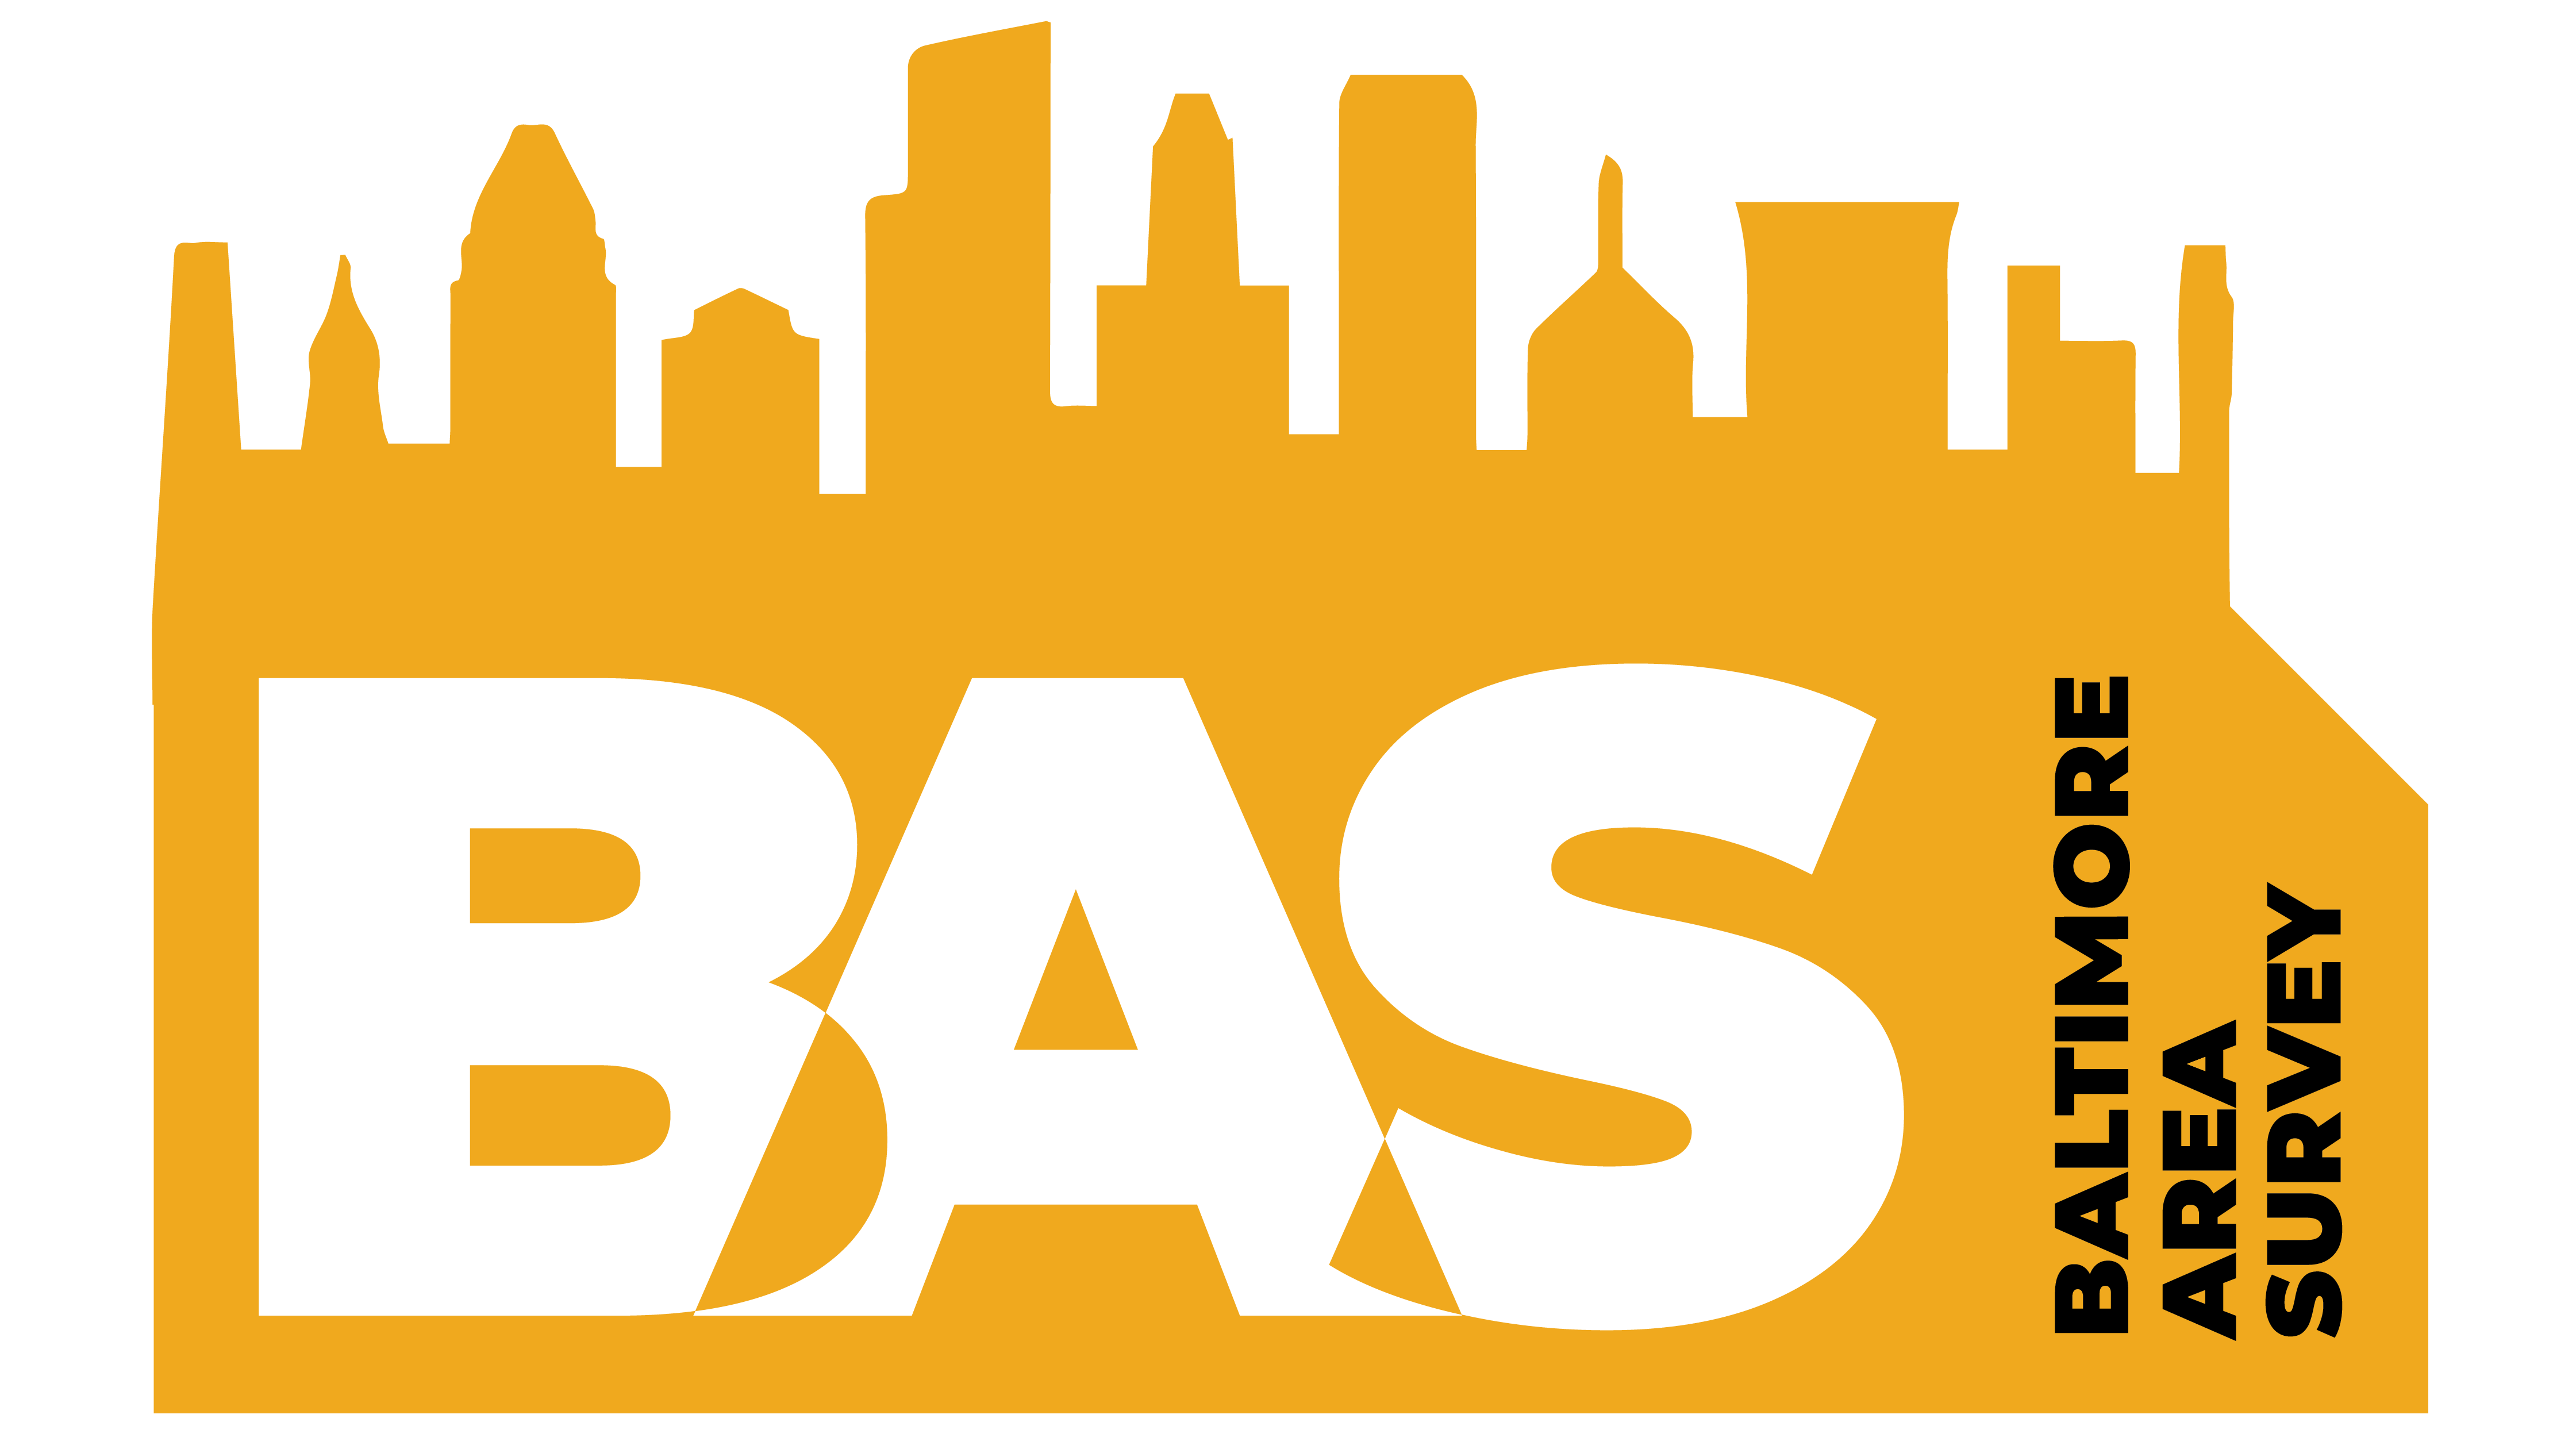 Baltimore Area Survey logo, black and white letters on a gold background of a city skyline